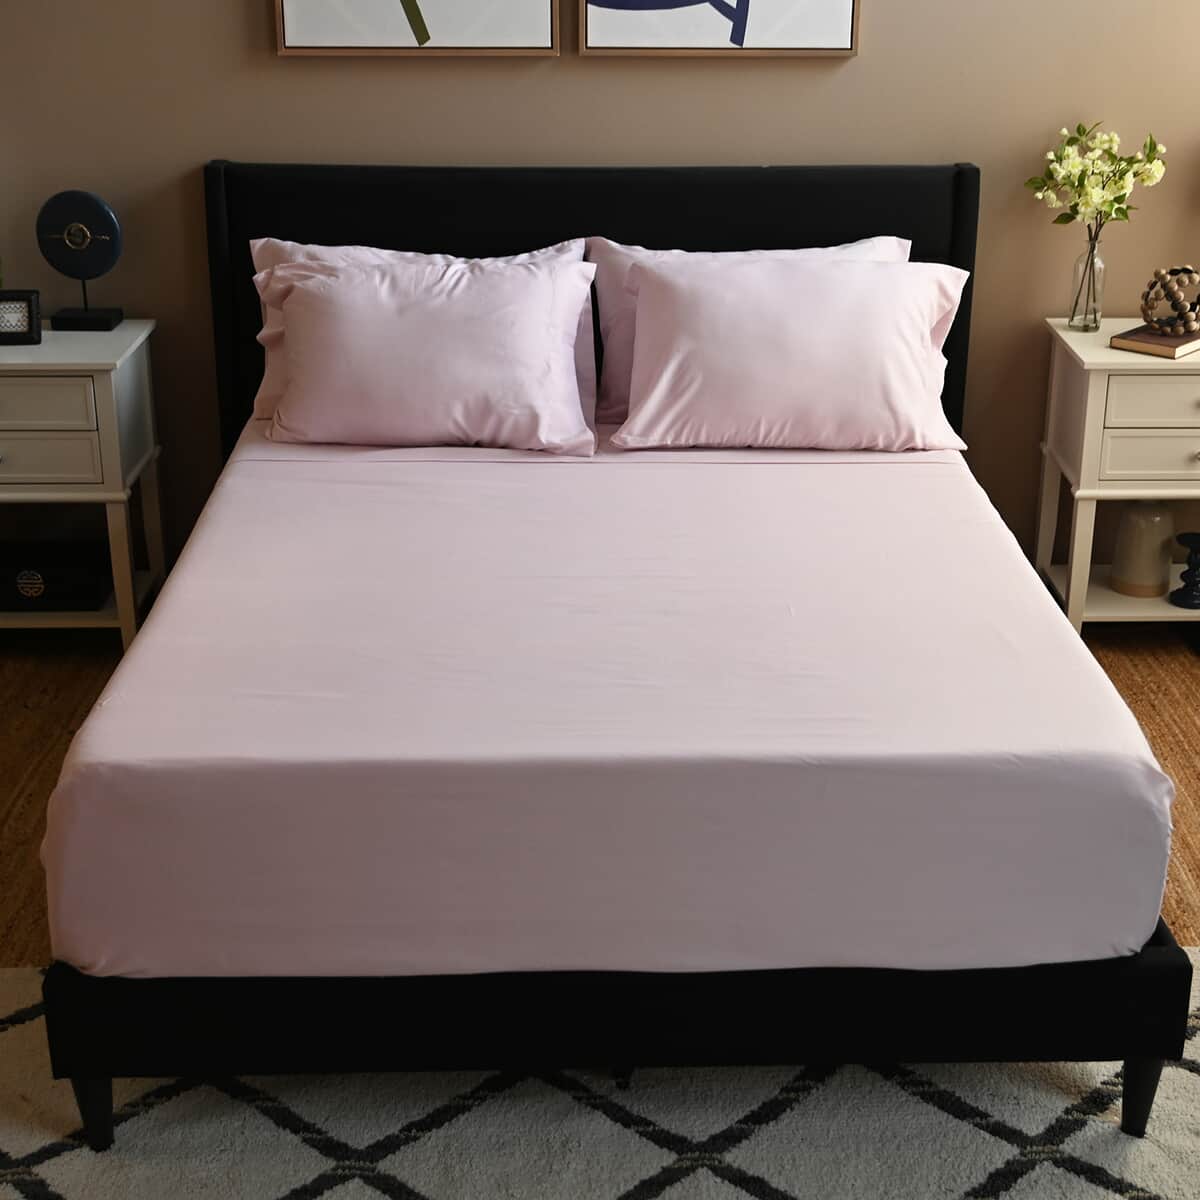 HOMESMART Lilac Copper Infused 6pc Sheet Set with 14 Inches Deep Pocket (30% Copper, 70% Microfiber) - Queen image number 0